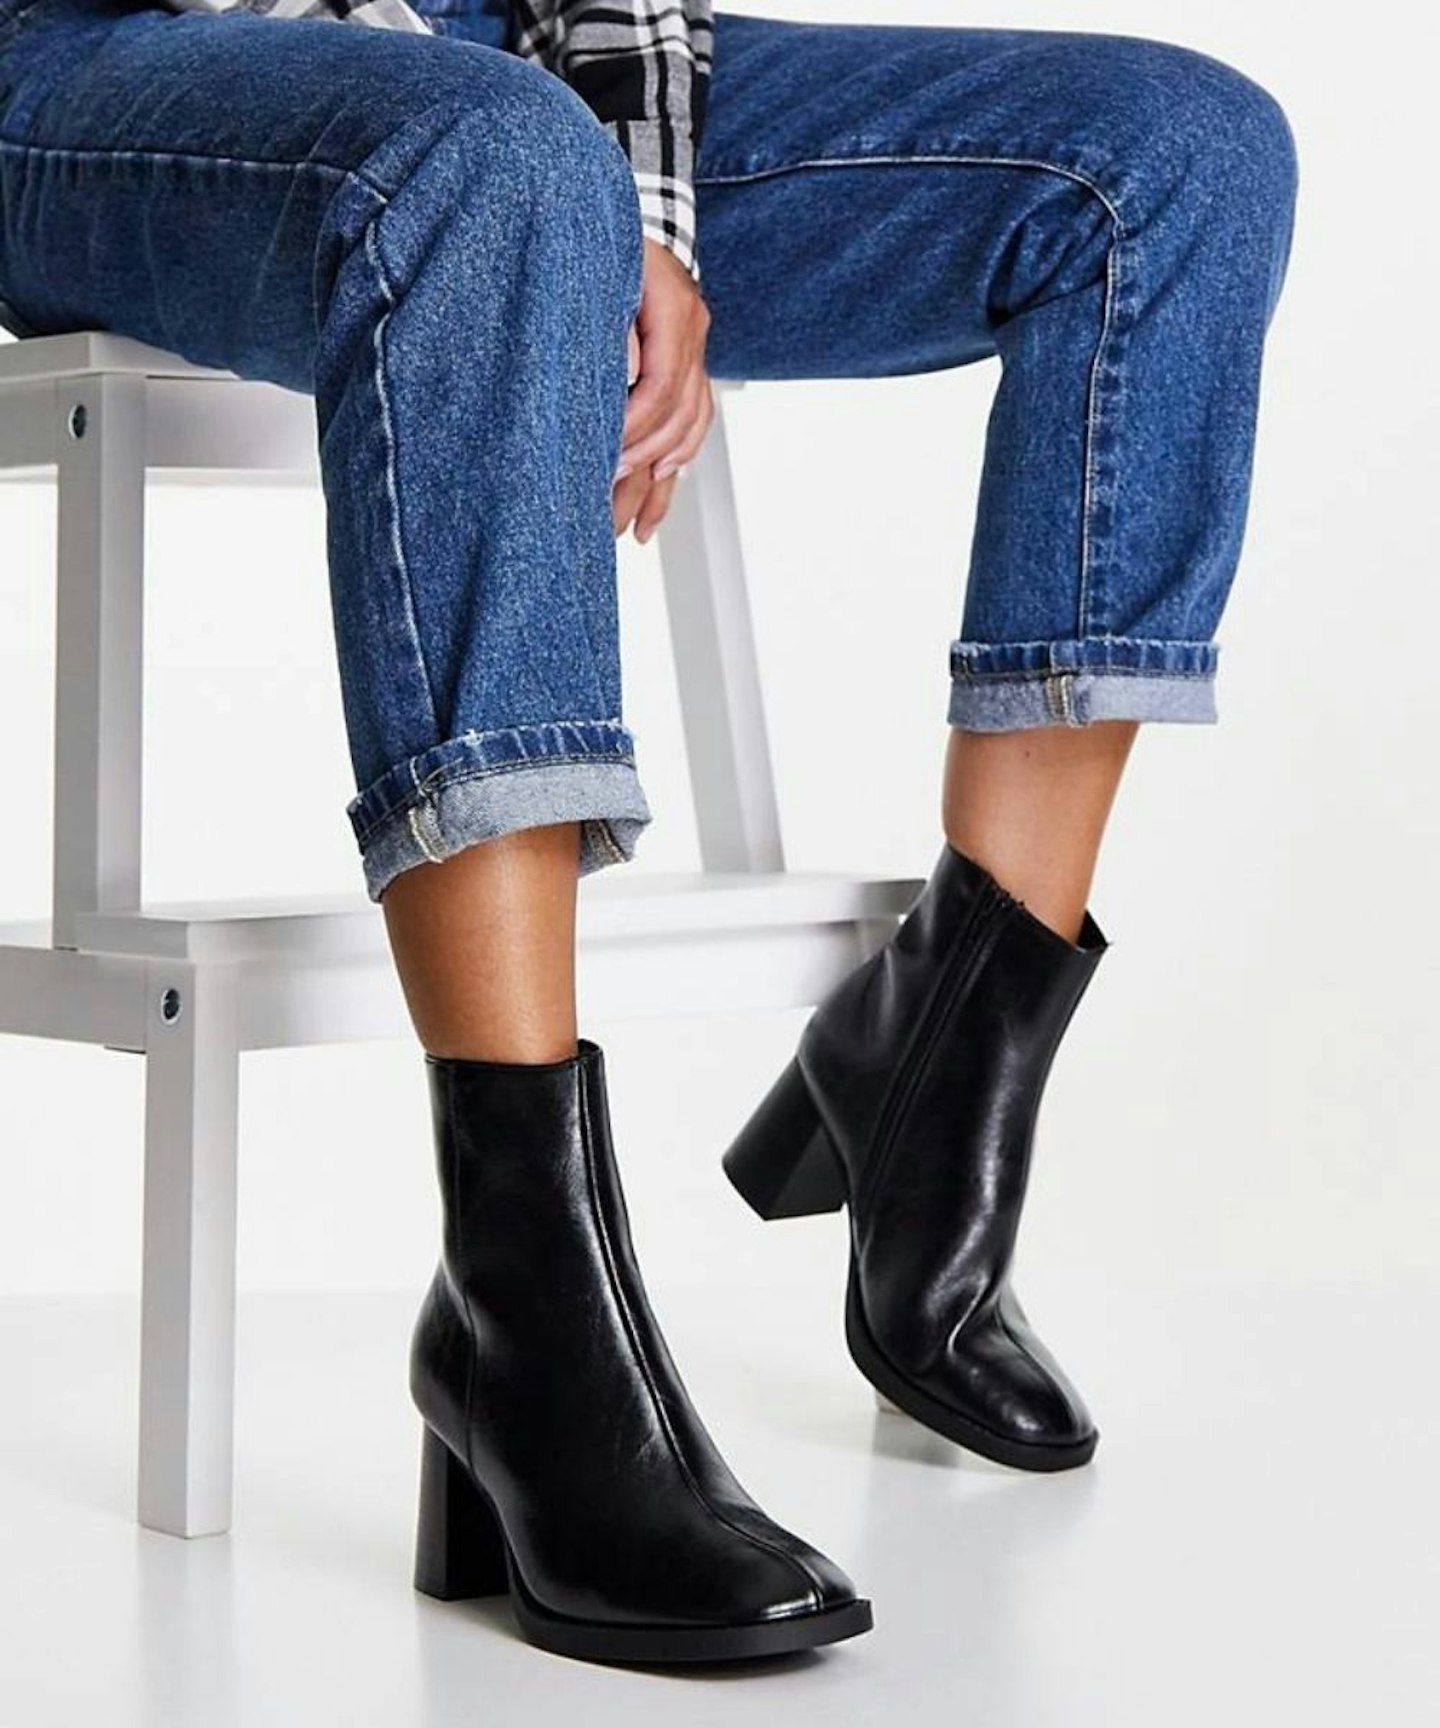 ASOS DESIGN Revival round toe block heeled boots in black